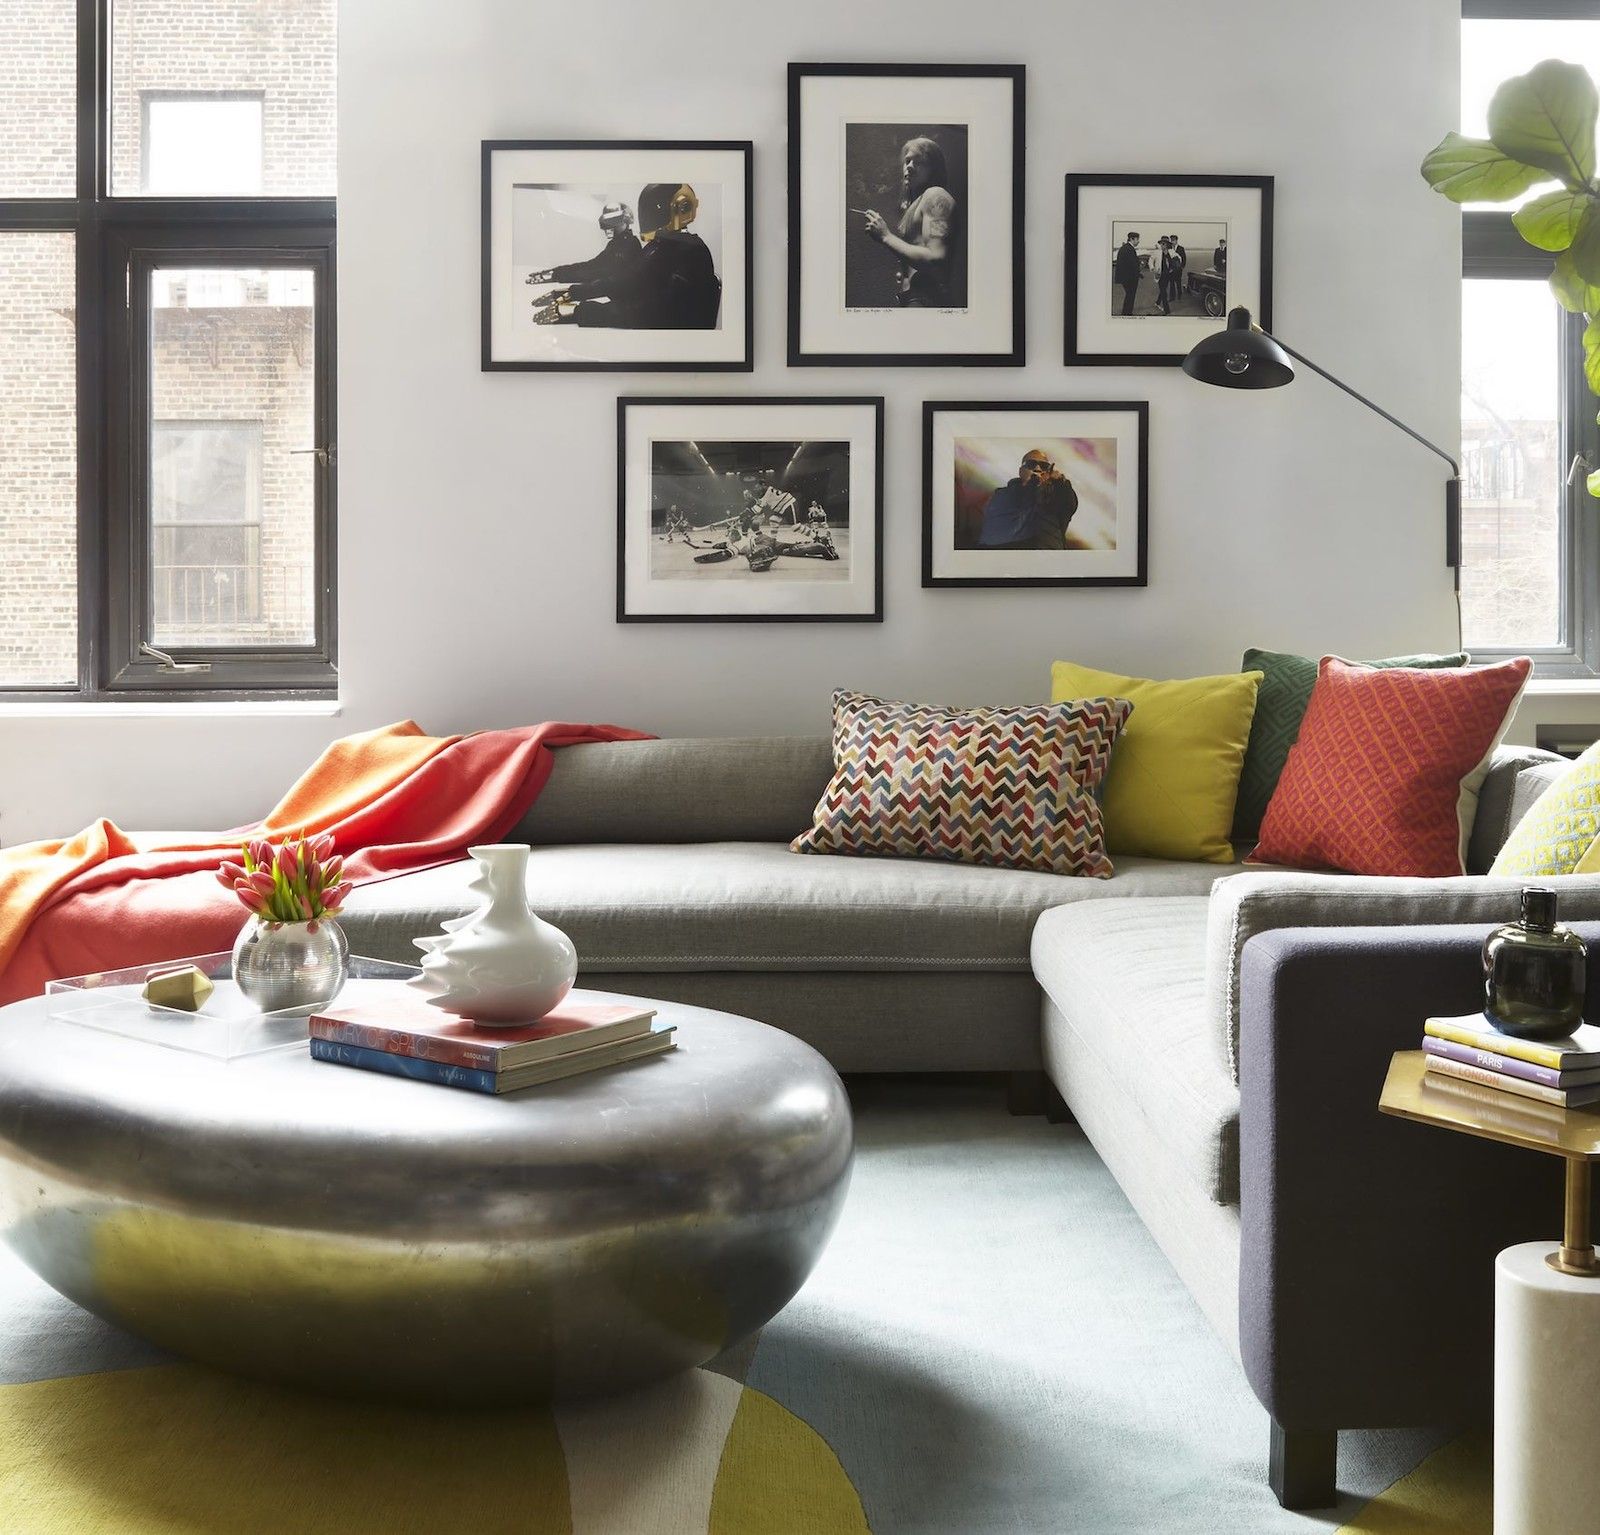 15 Ways To Style A Grey Sofa In Your Home – Décor Aid Regarding Sofas In Dark Grey (Gallery 16 of 20)